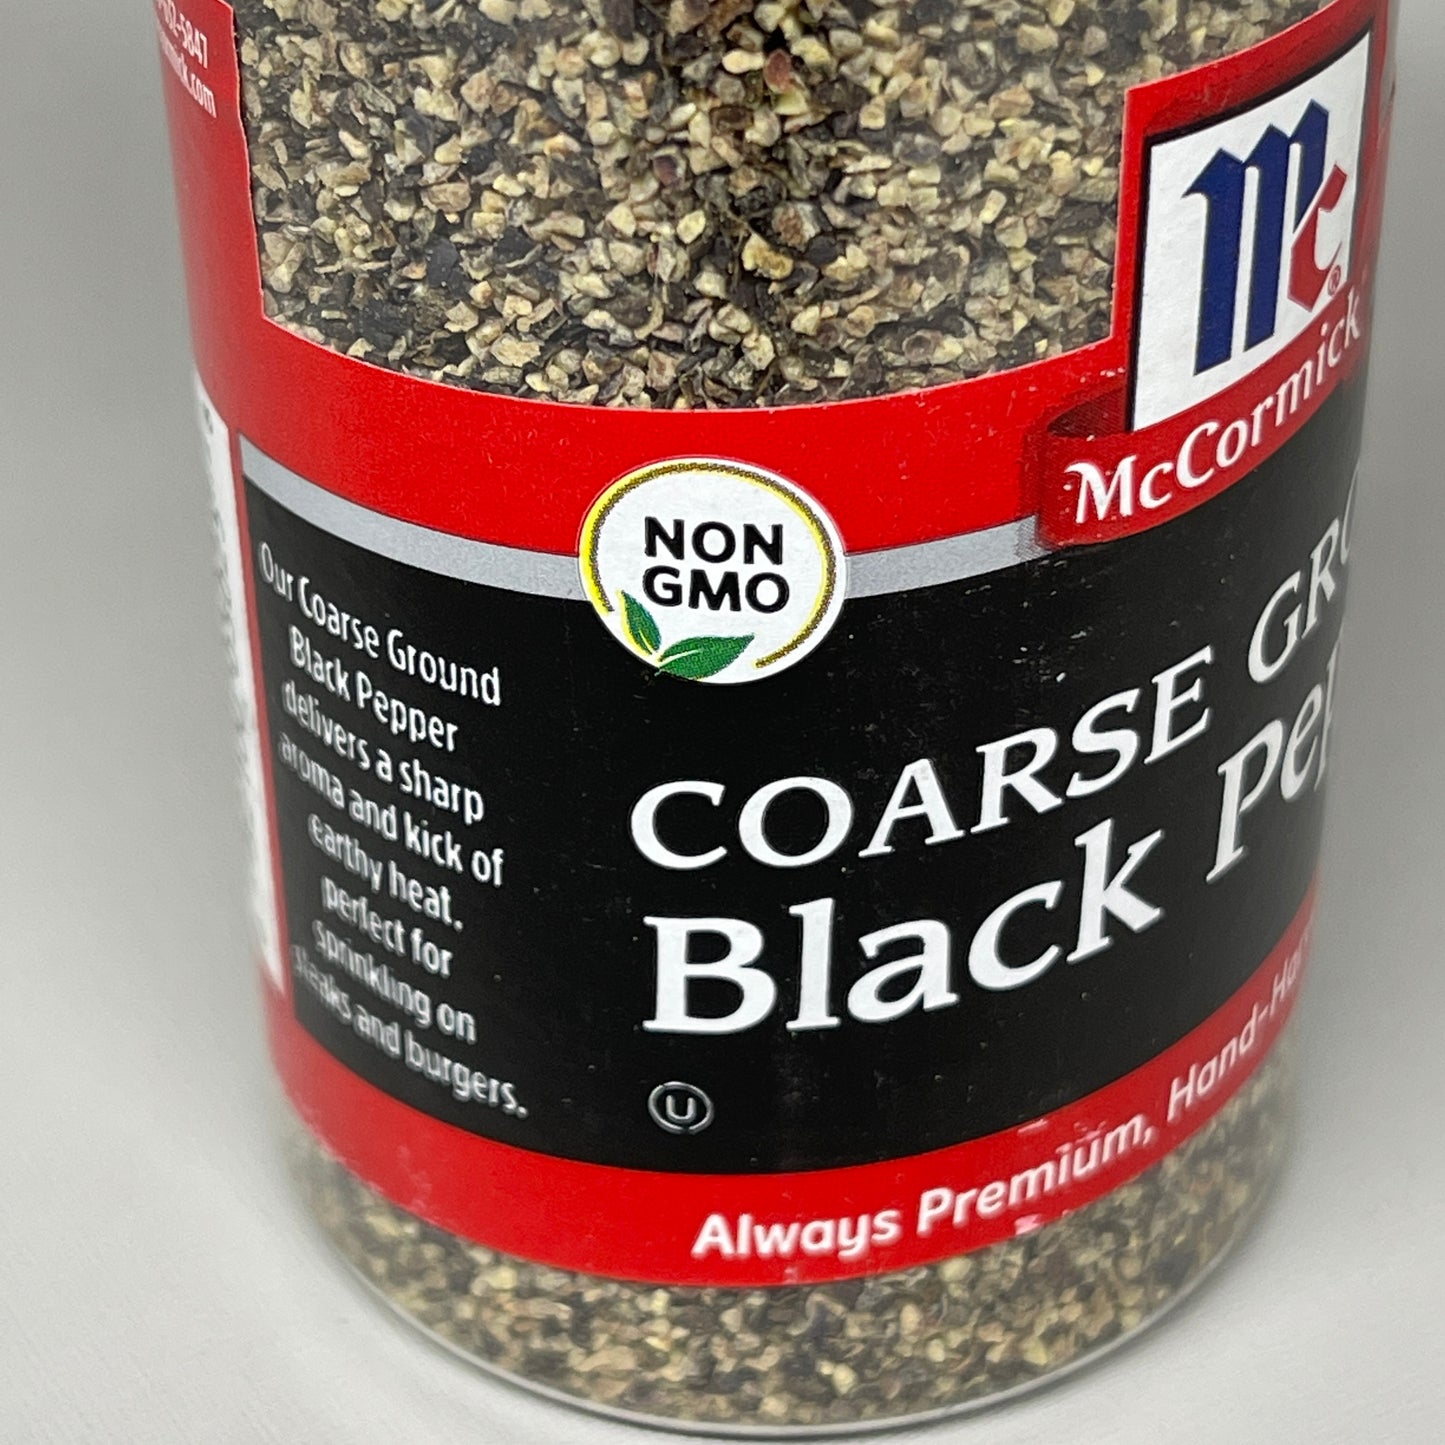 MCCORMICK Coarse Ground Black Pepper 3.12 oz (63g) Best By 7/25 (New)